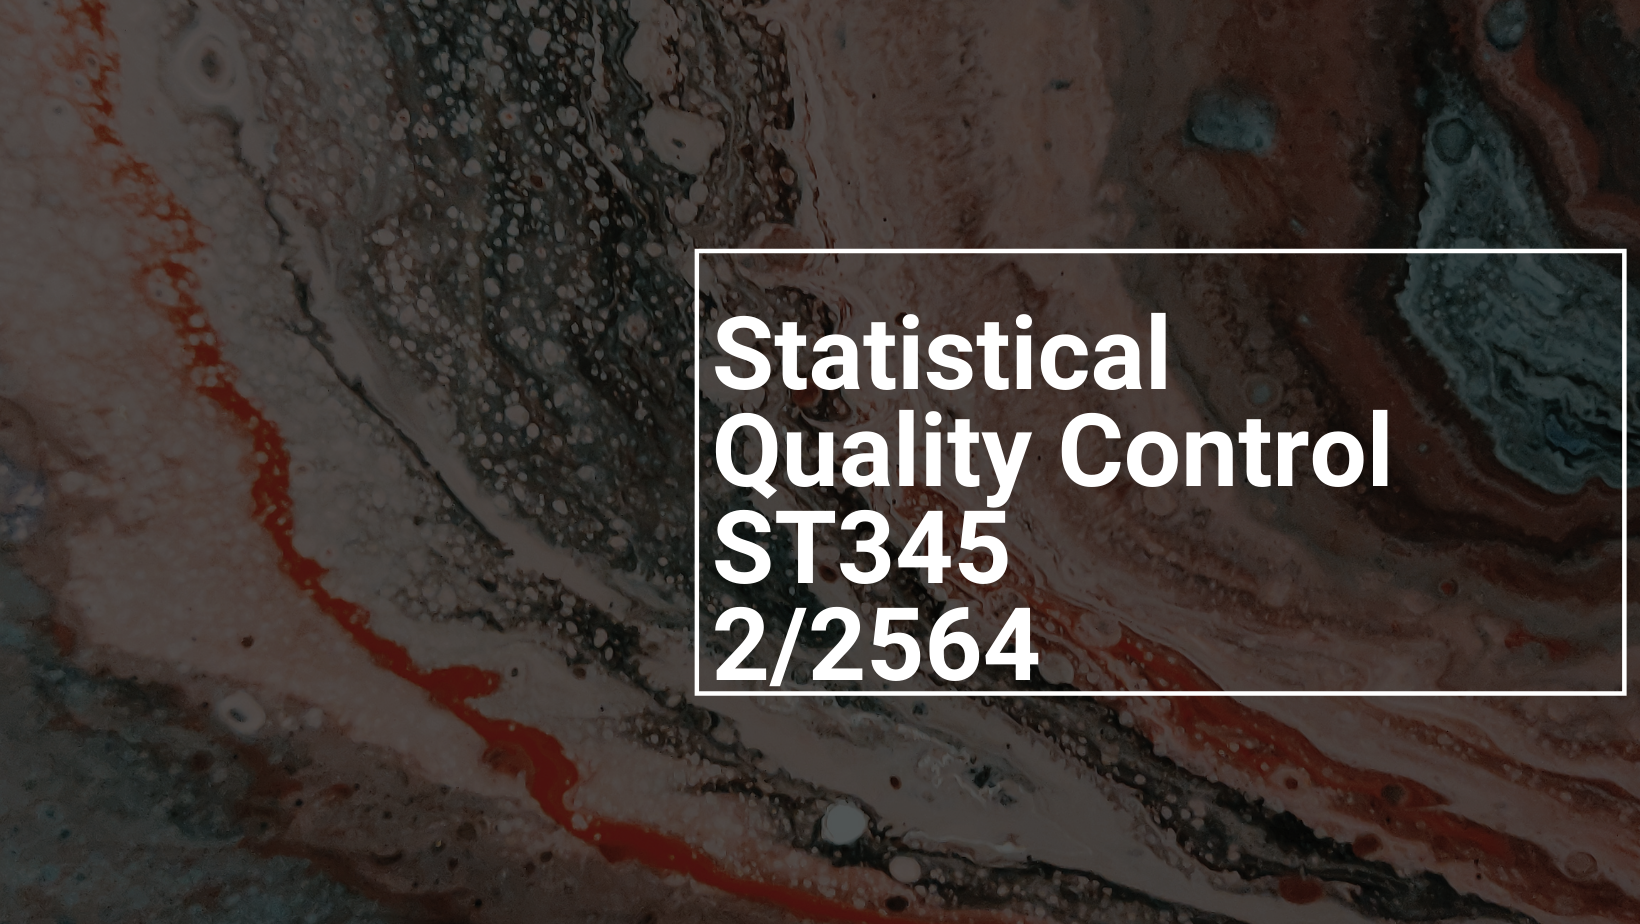 ST345 : Statistical Quality Control 2/2564